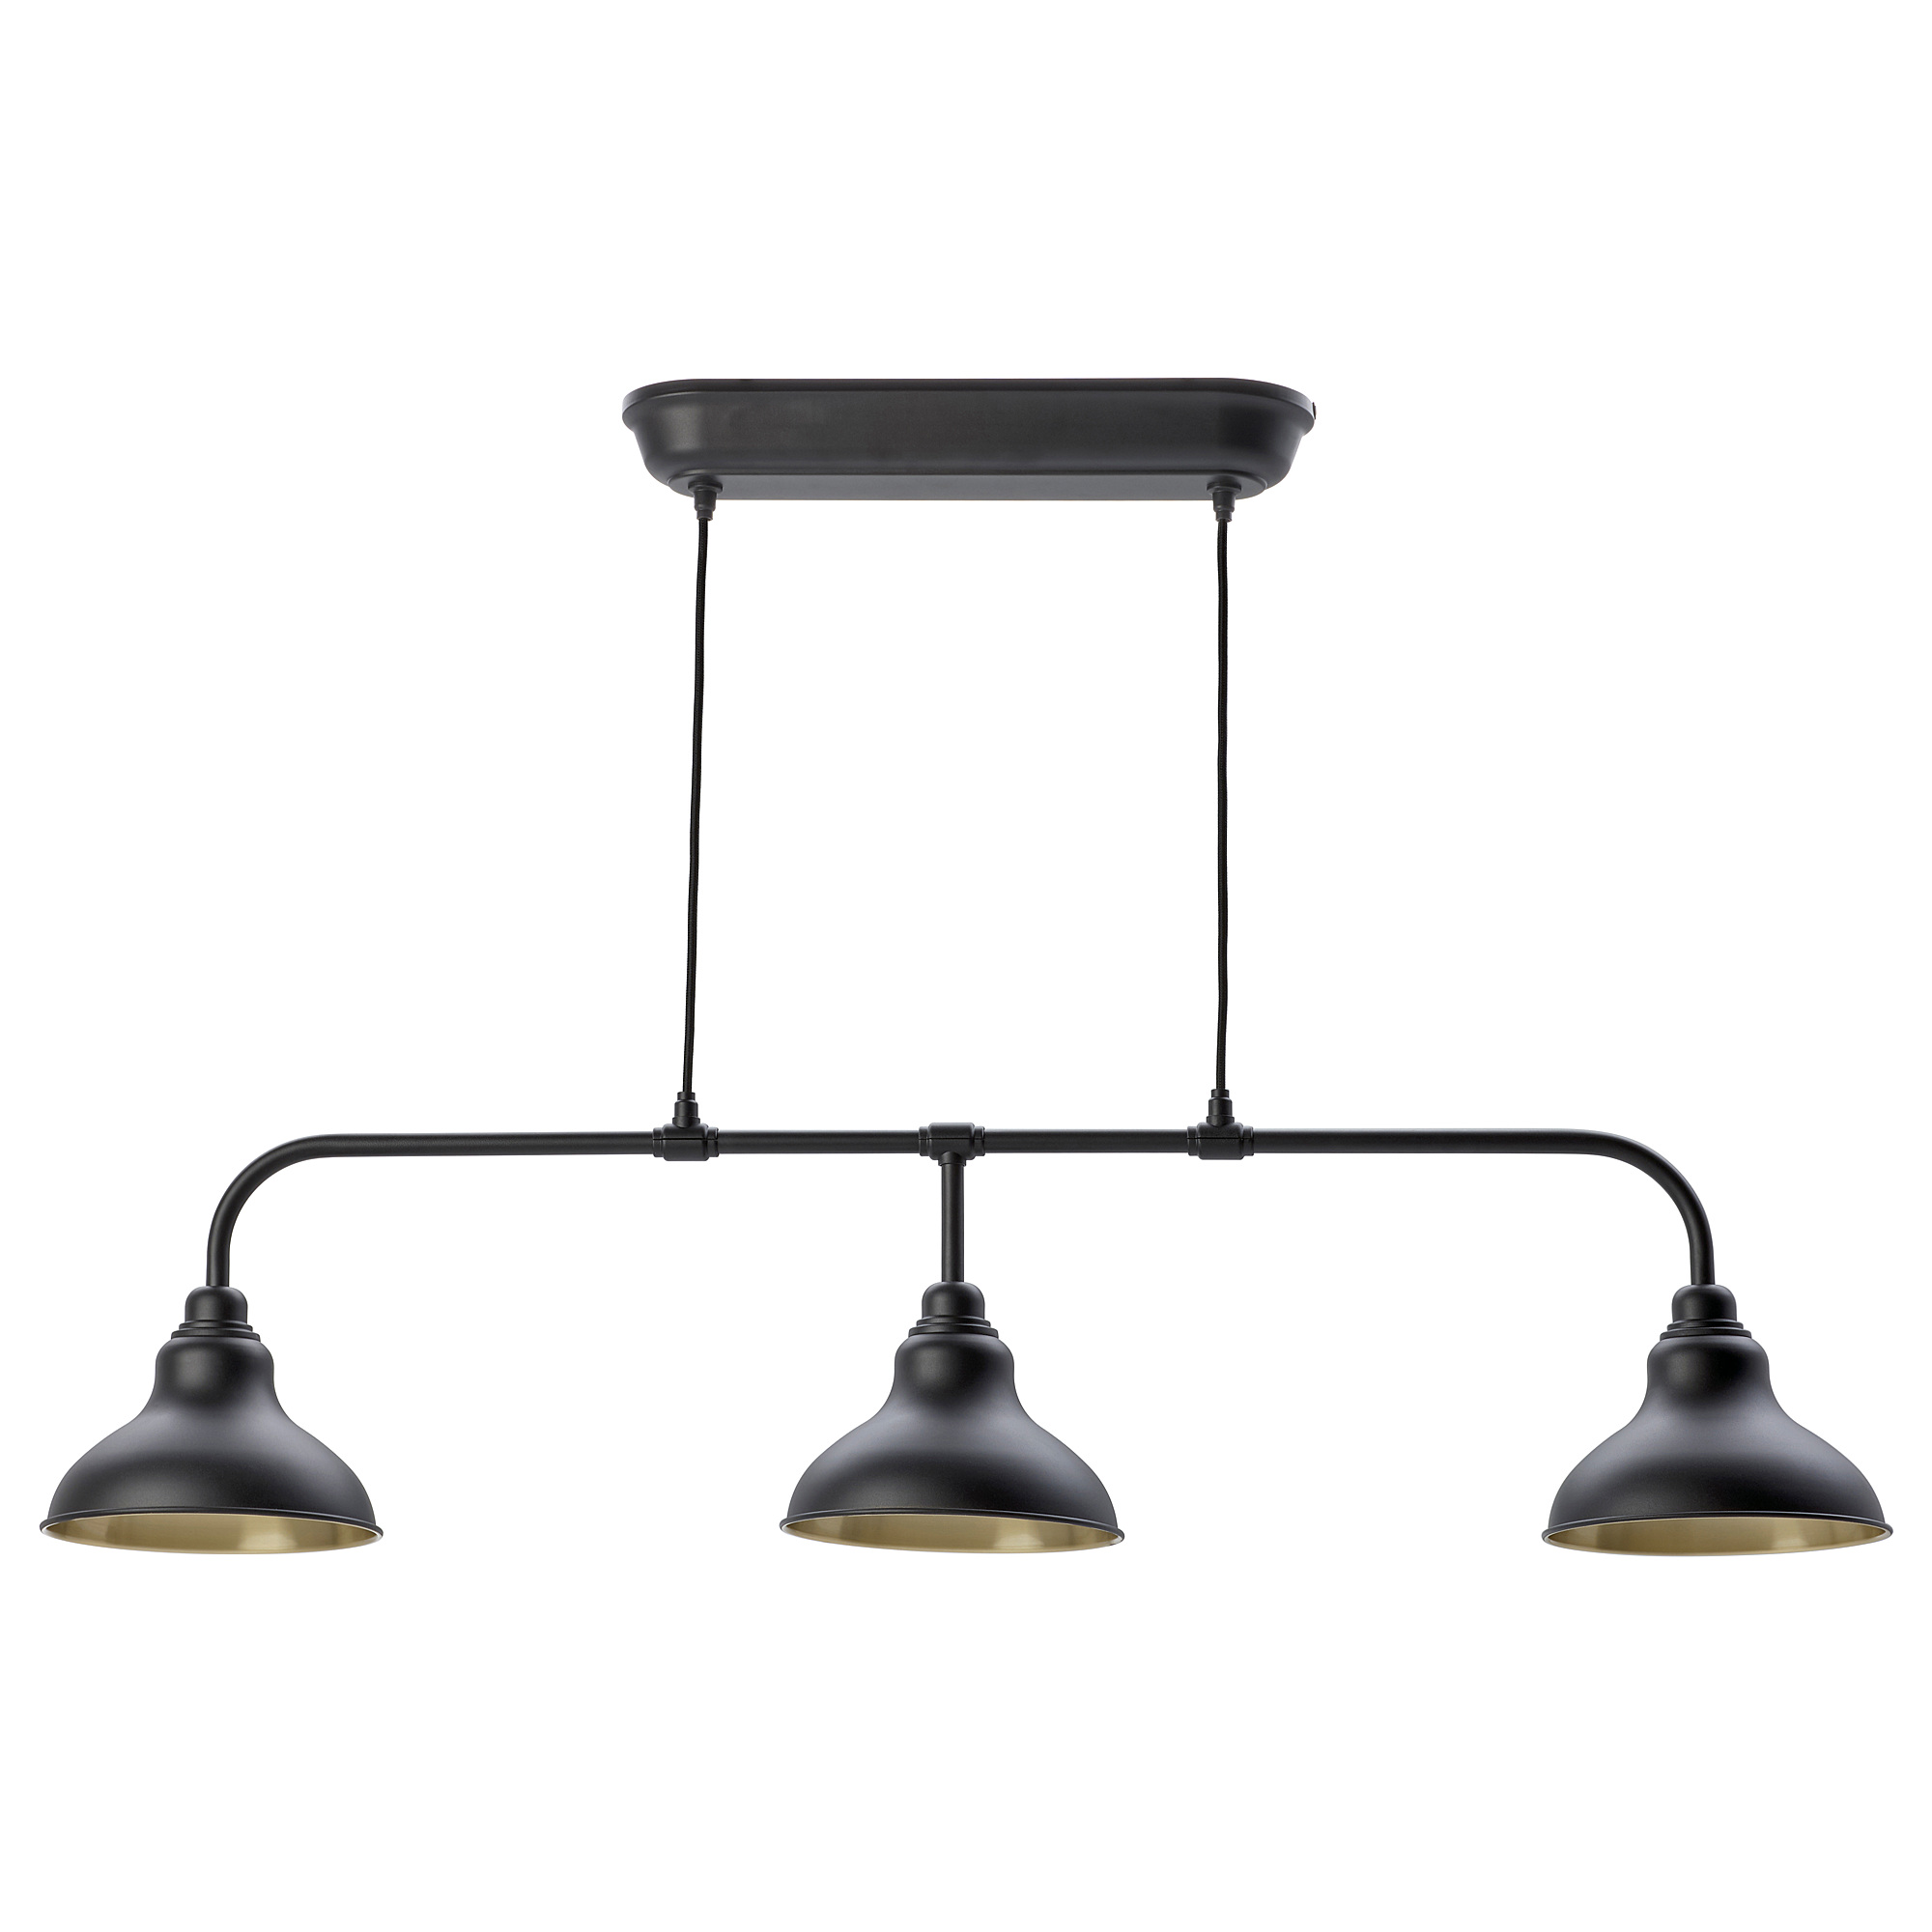 AGUNNARYD pendant lamp with 3 lamps